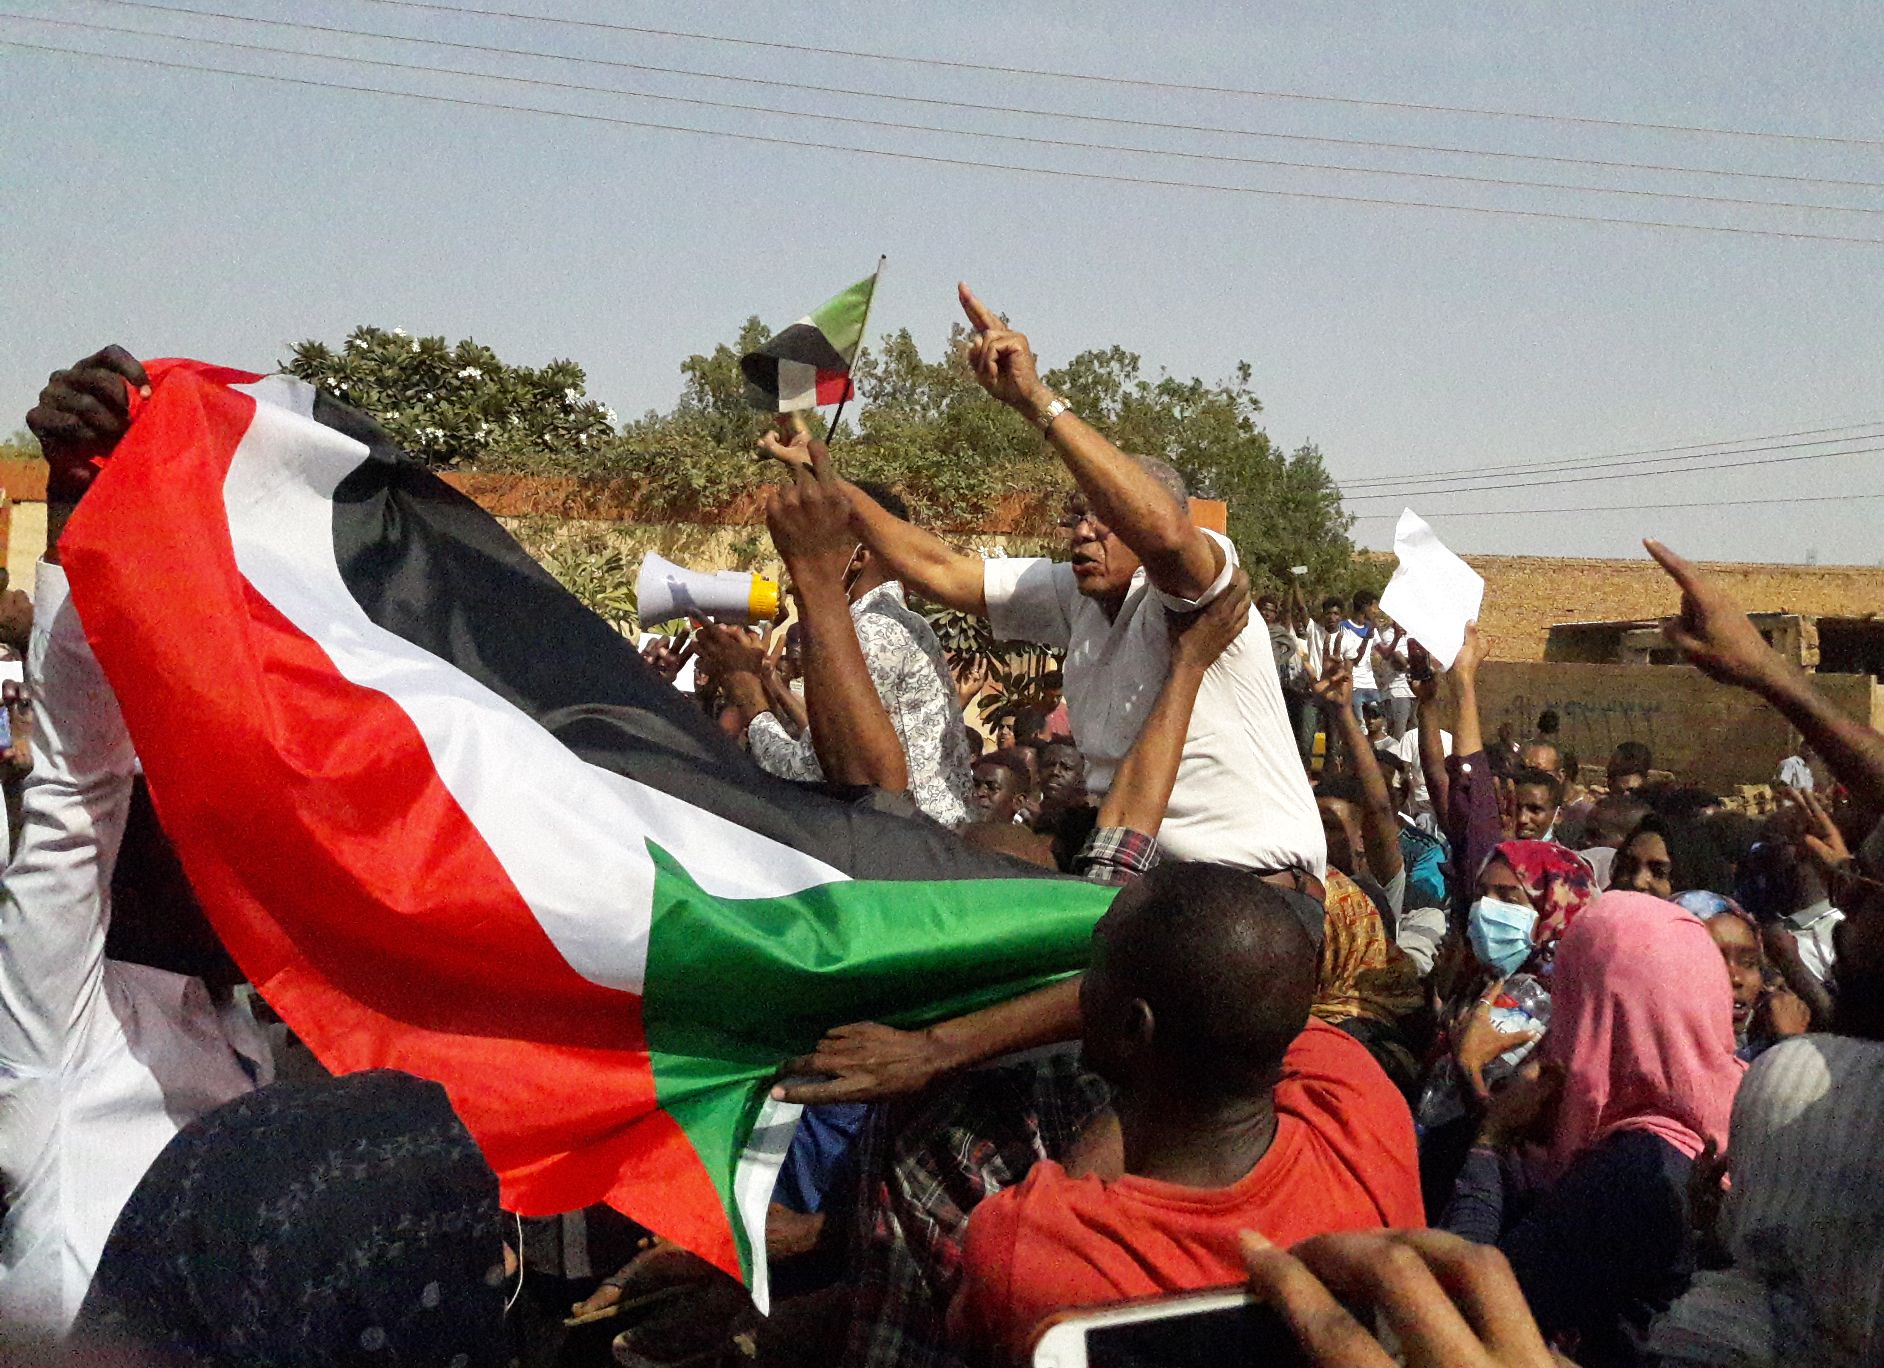 Sudanese protesters wave their national flag and chant slogans during an anti-government demonstration in the capital Khartoum's twin city of Omdurman on January 31, 2019.